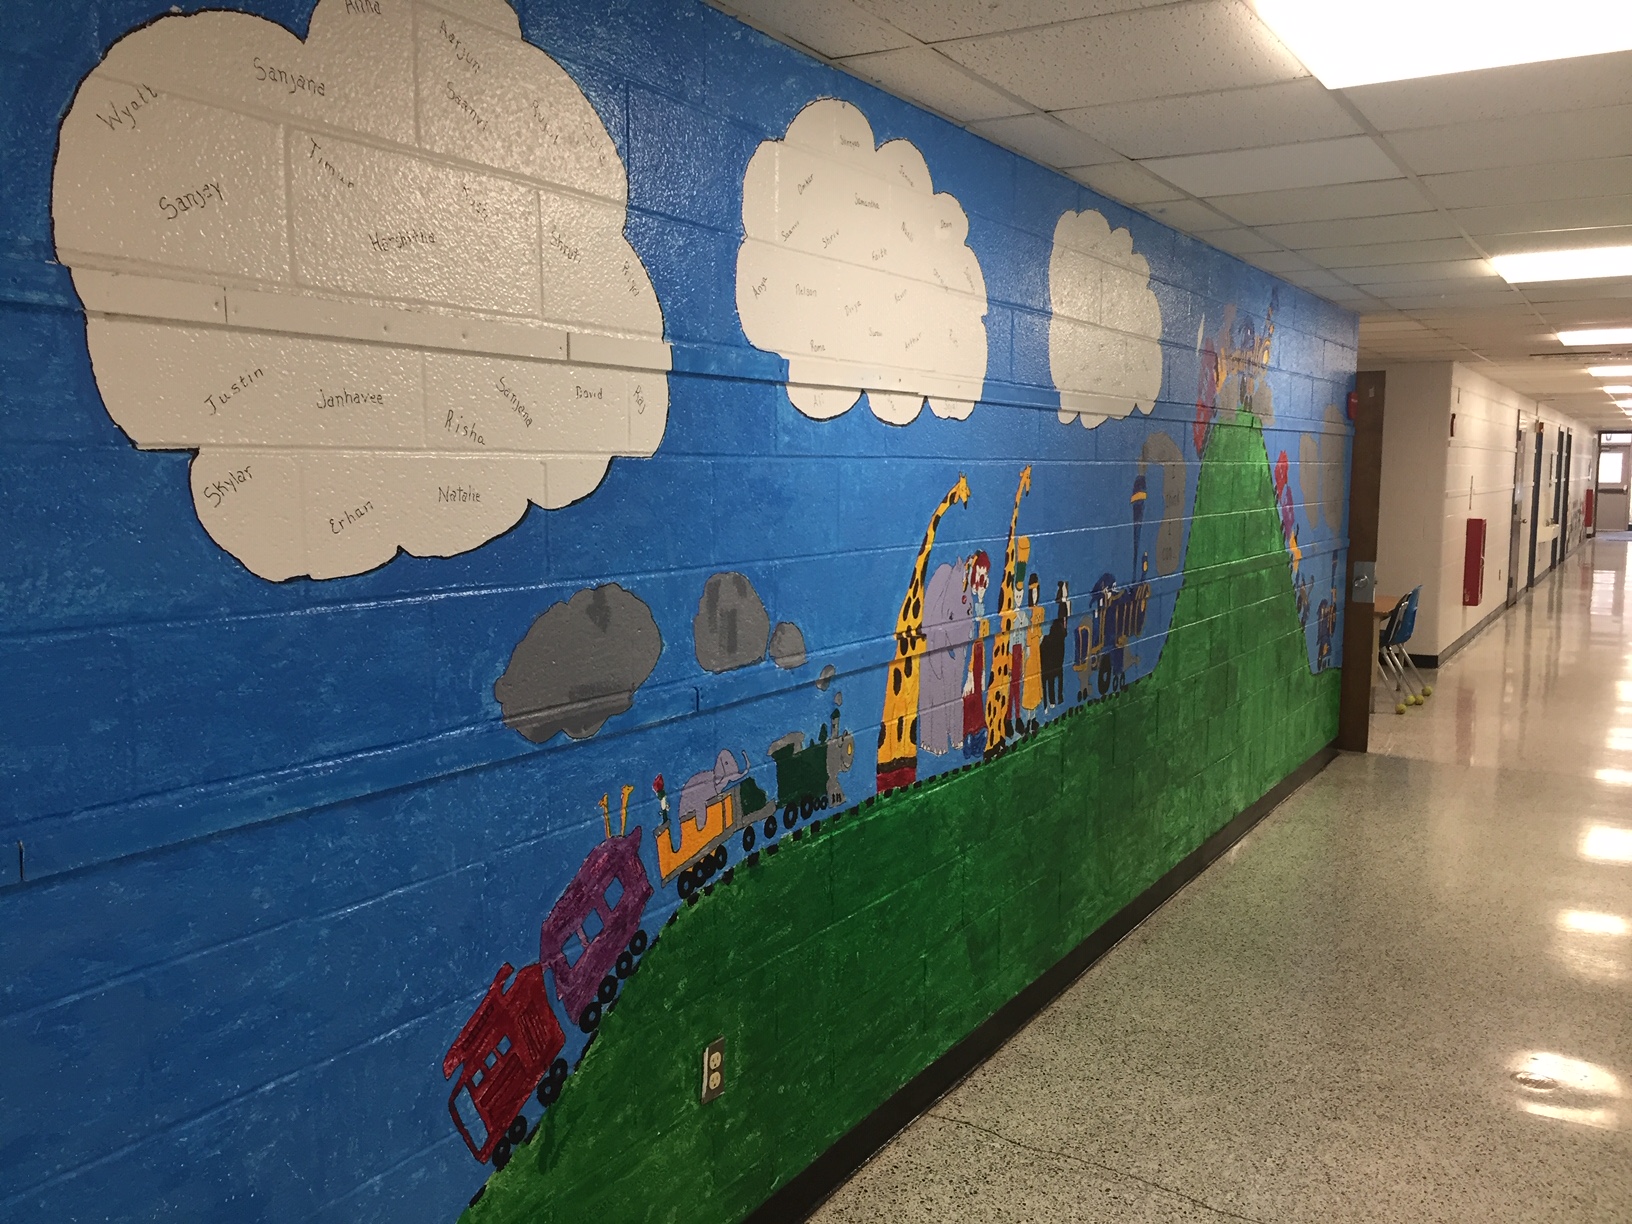 Halls and Walls | Northvail Elementary School